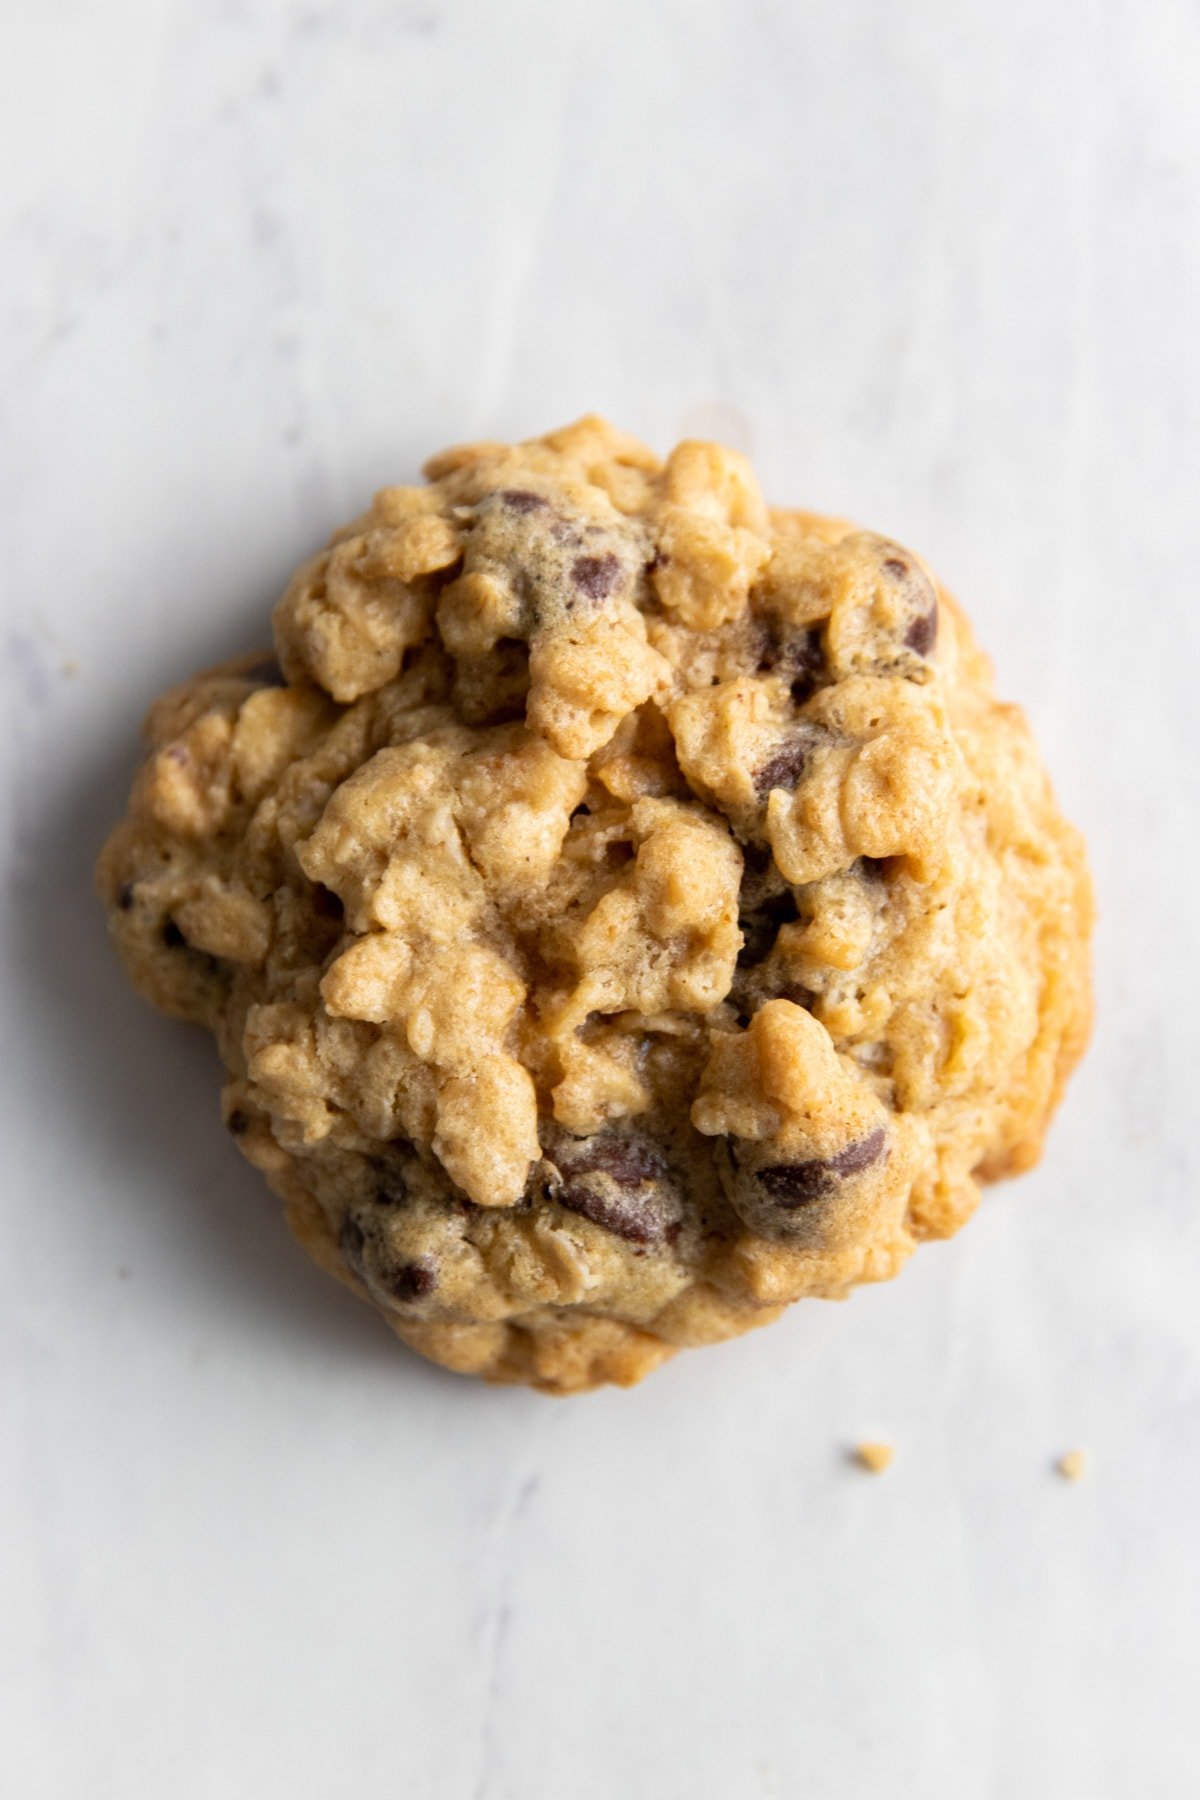 A single low FODMAP oatmeal cookie with chocolate chips on a marble counter. 